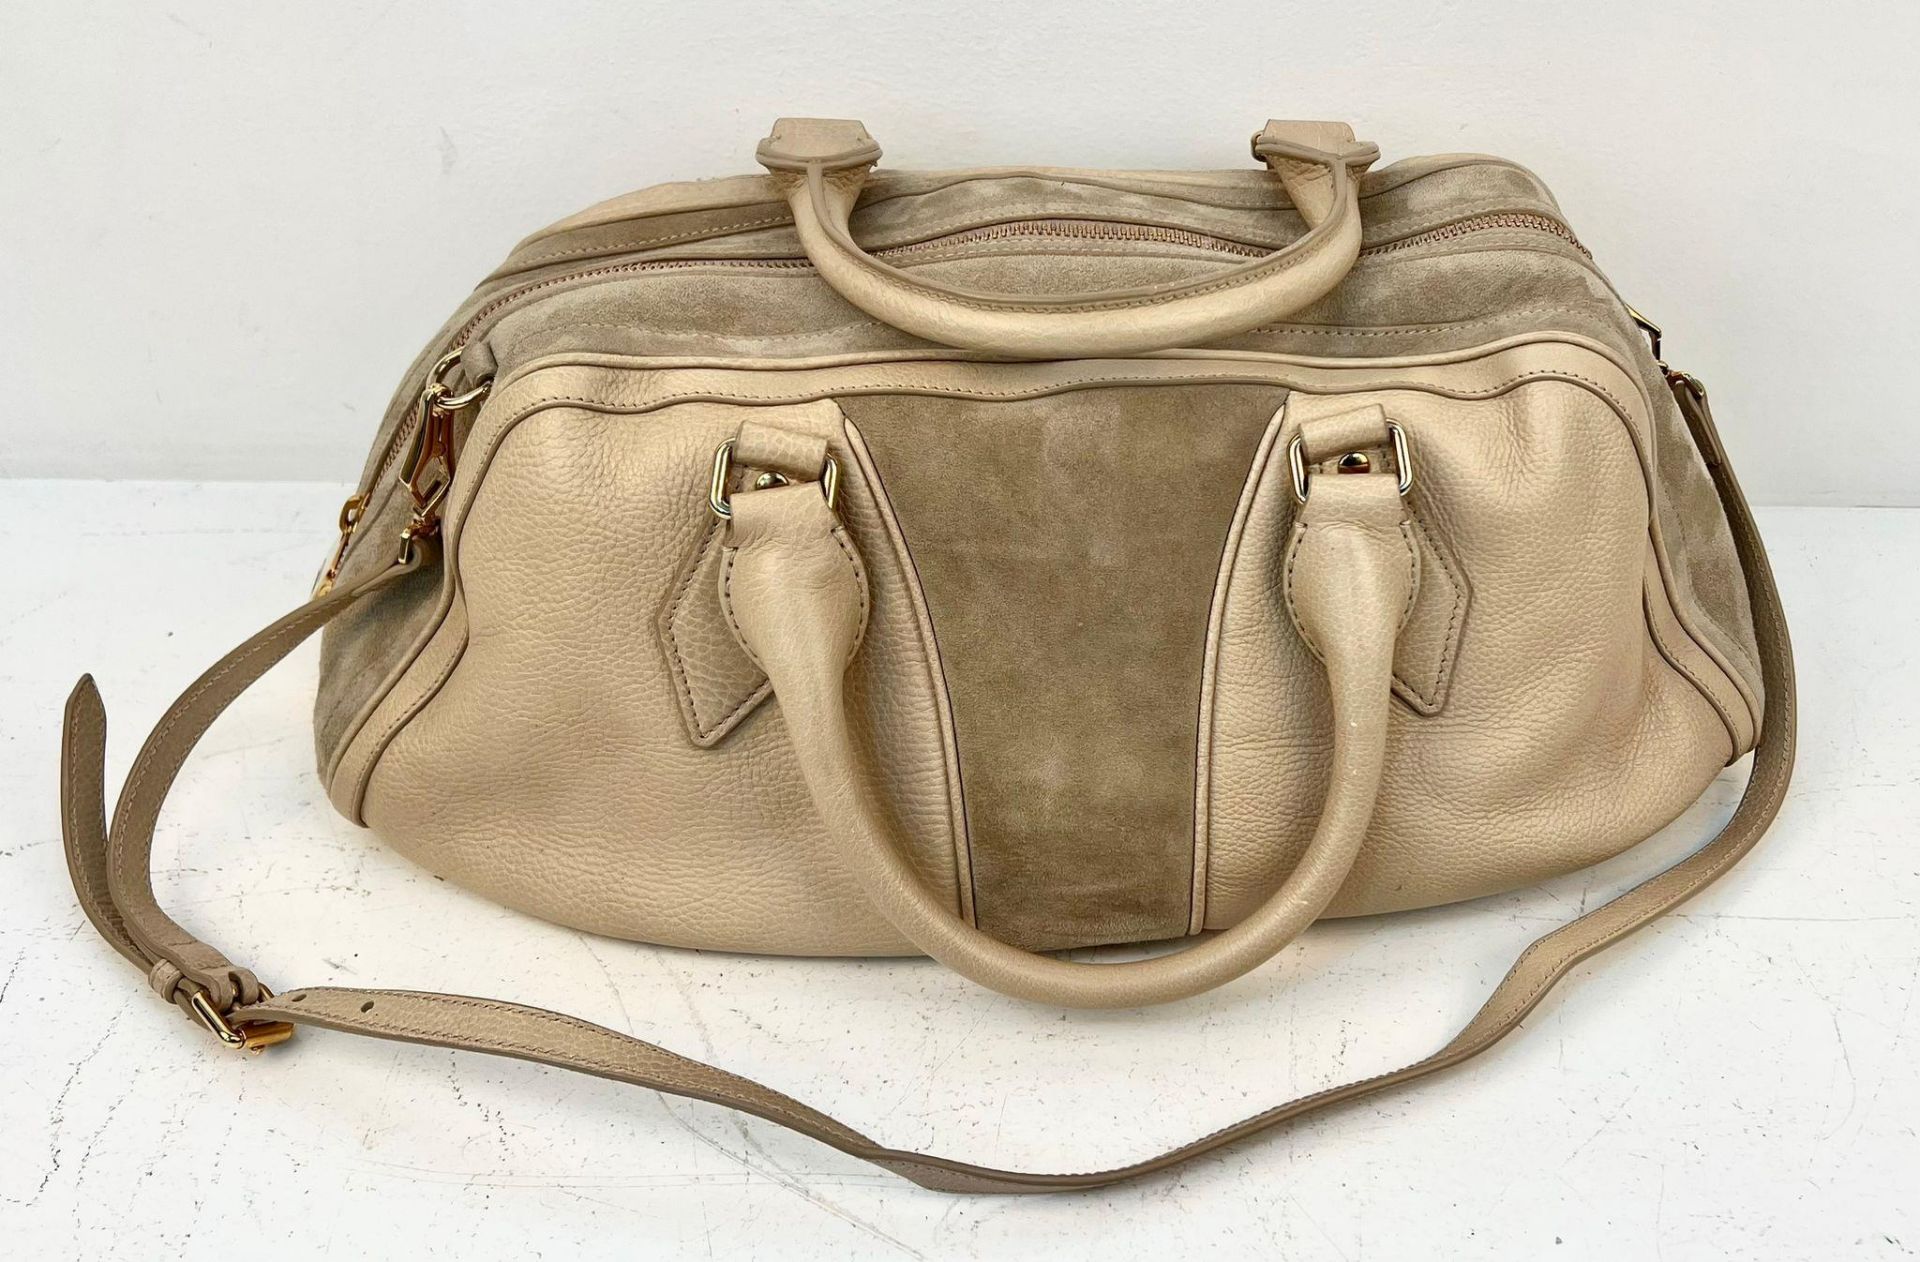 A Burberry Leather and Suede Satchel Bag. Beige soft leather and suede exterior. Shoulder/cross-body